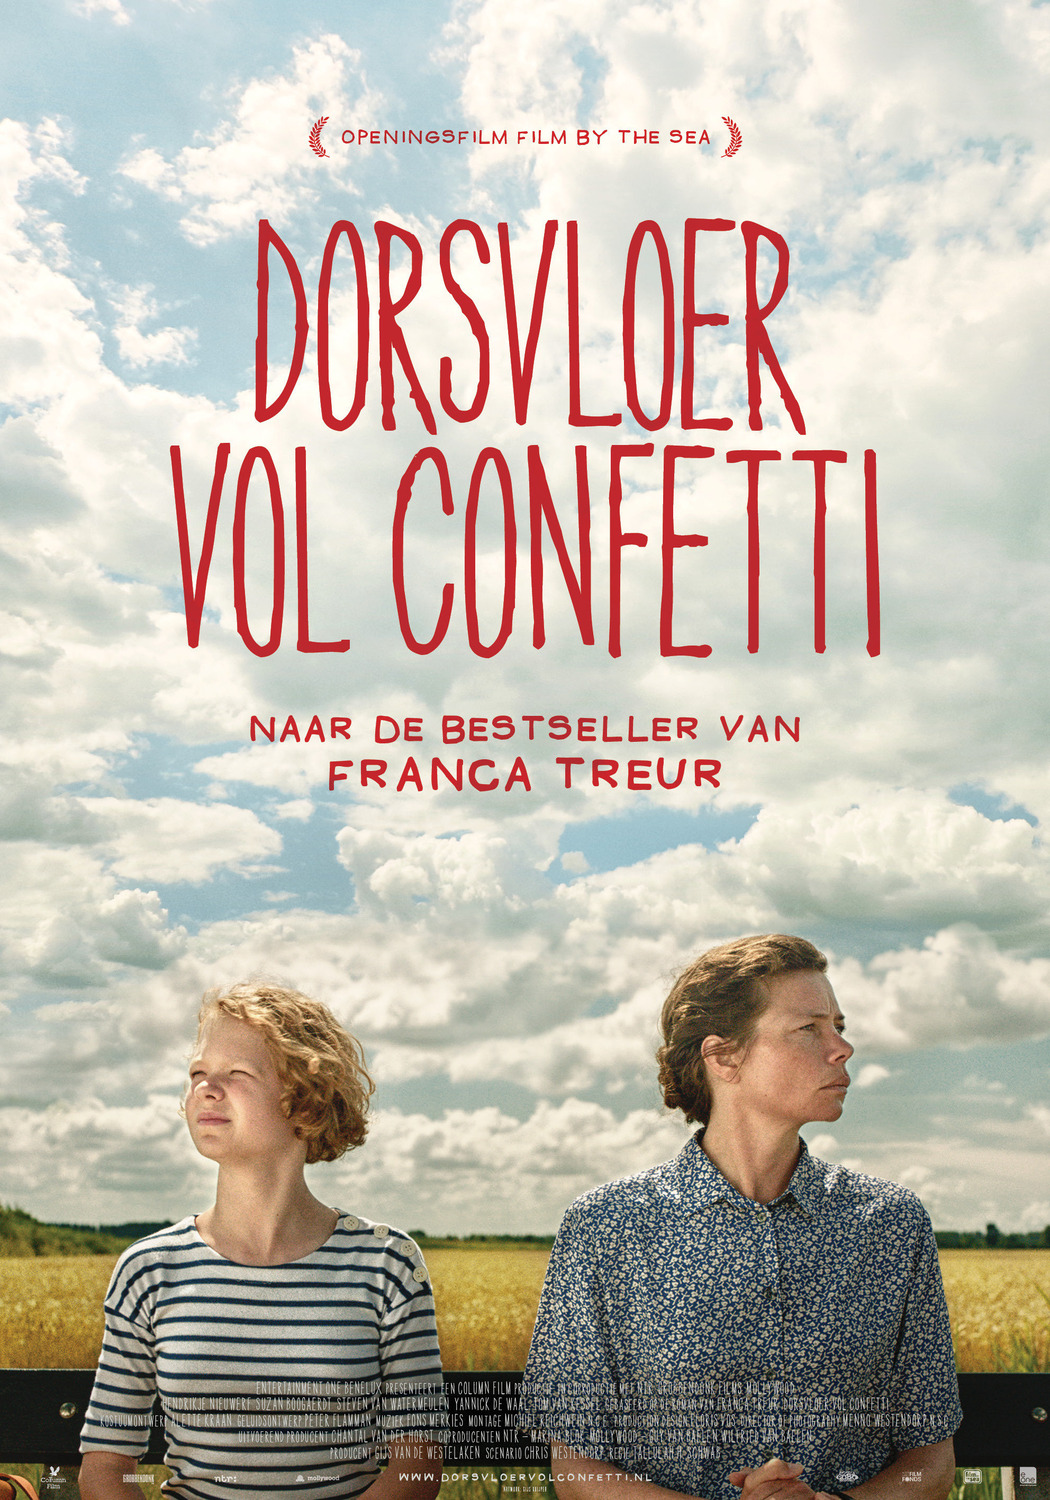 Extra Large Movie Poster Image for Dorsvloer vol confetti 